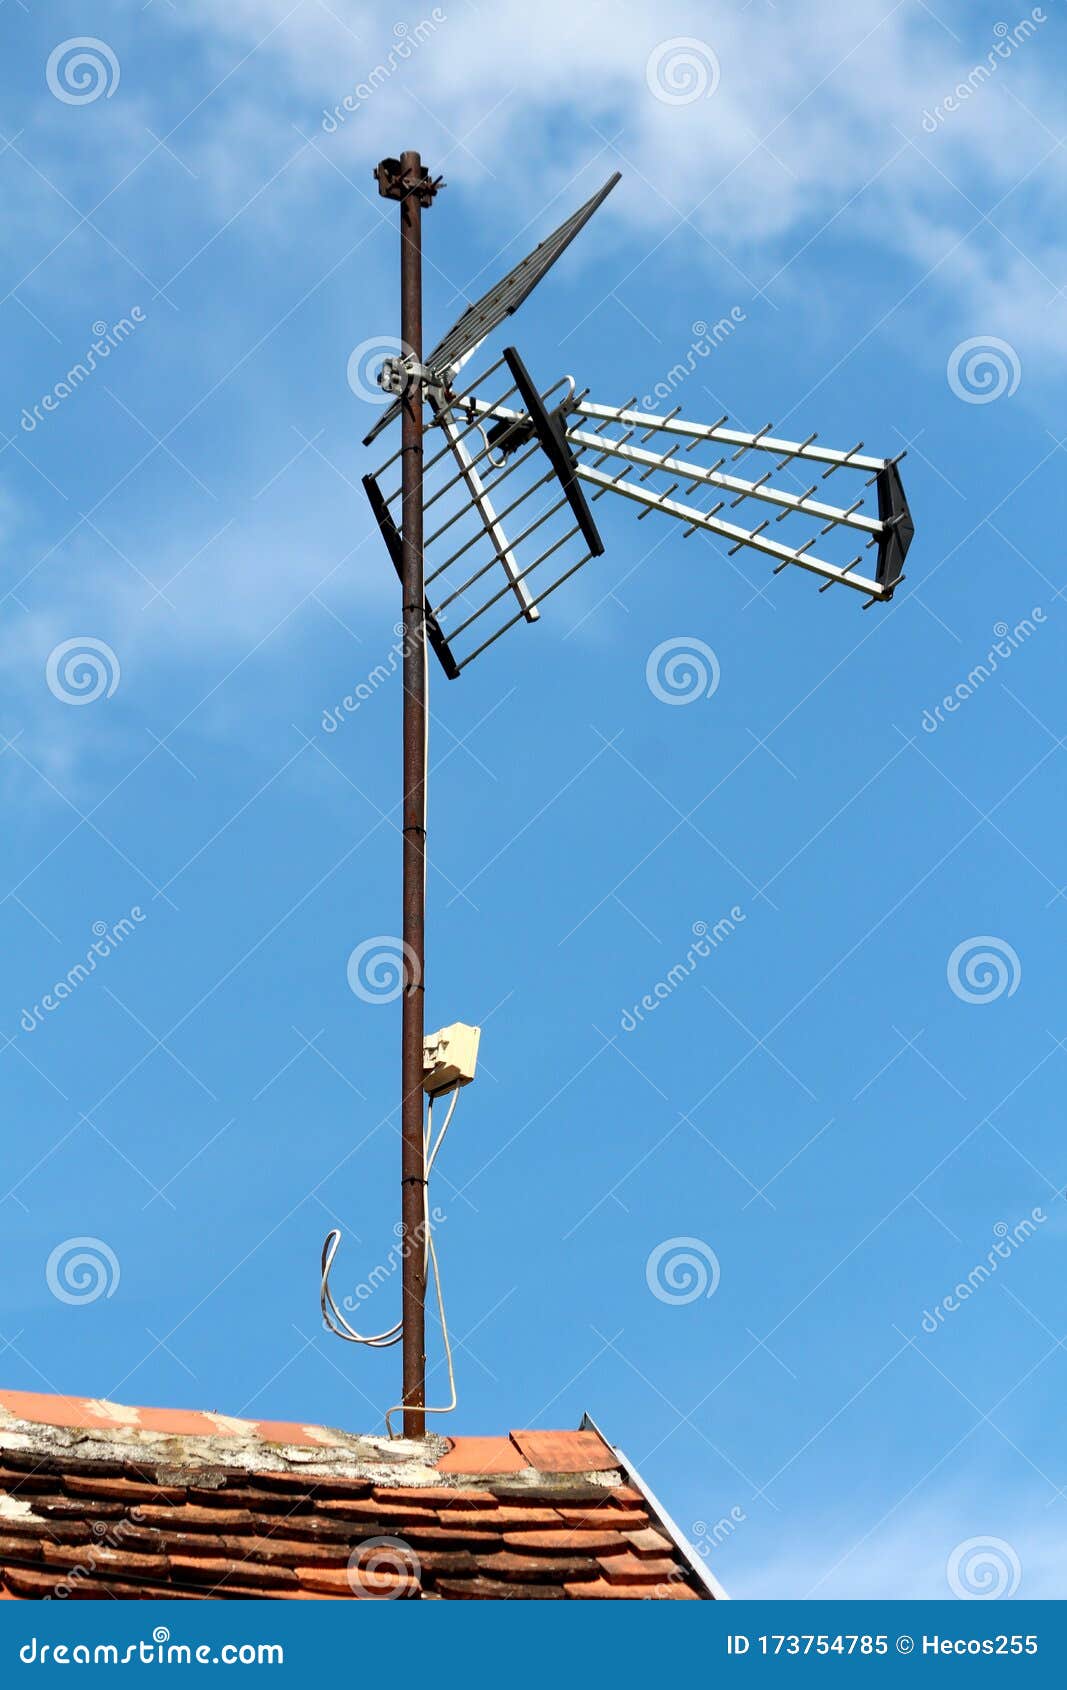 Large Tv Antenna Mounted On Top Of Rusted Metal Pole On Edge Of Family House Roof Covered With Dilapidated Old Roof Tiles Stock Image Image Of Dilapidated Metal